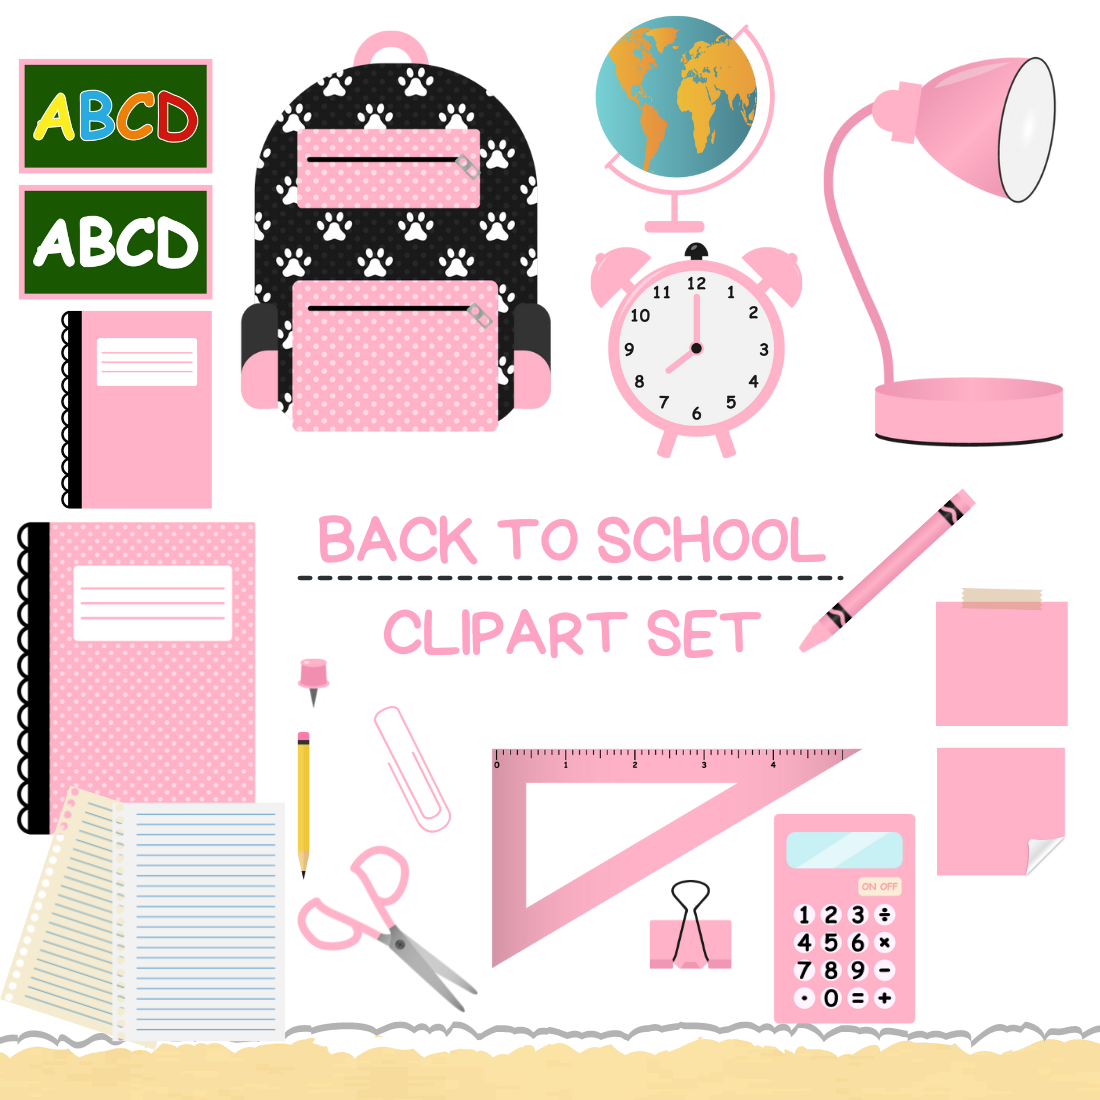 School Supplies Pink - Back to School Stationary Clip Art